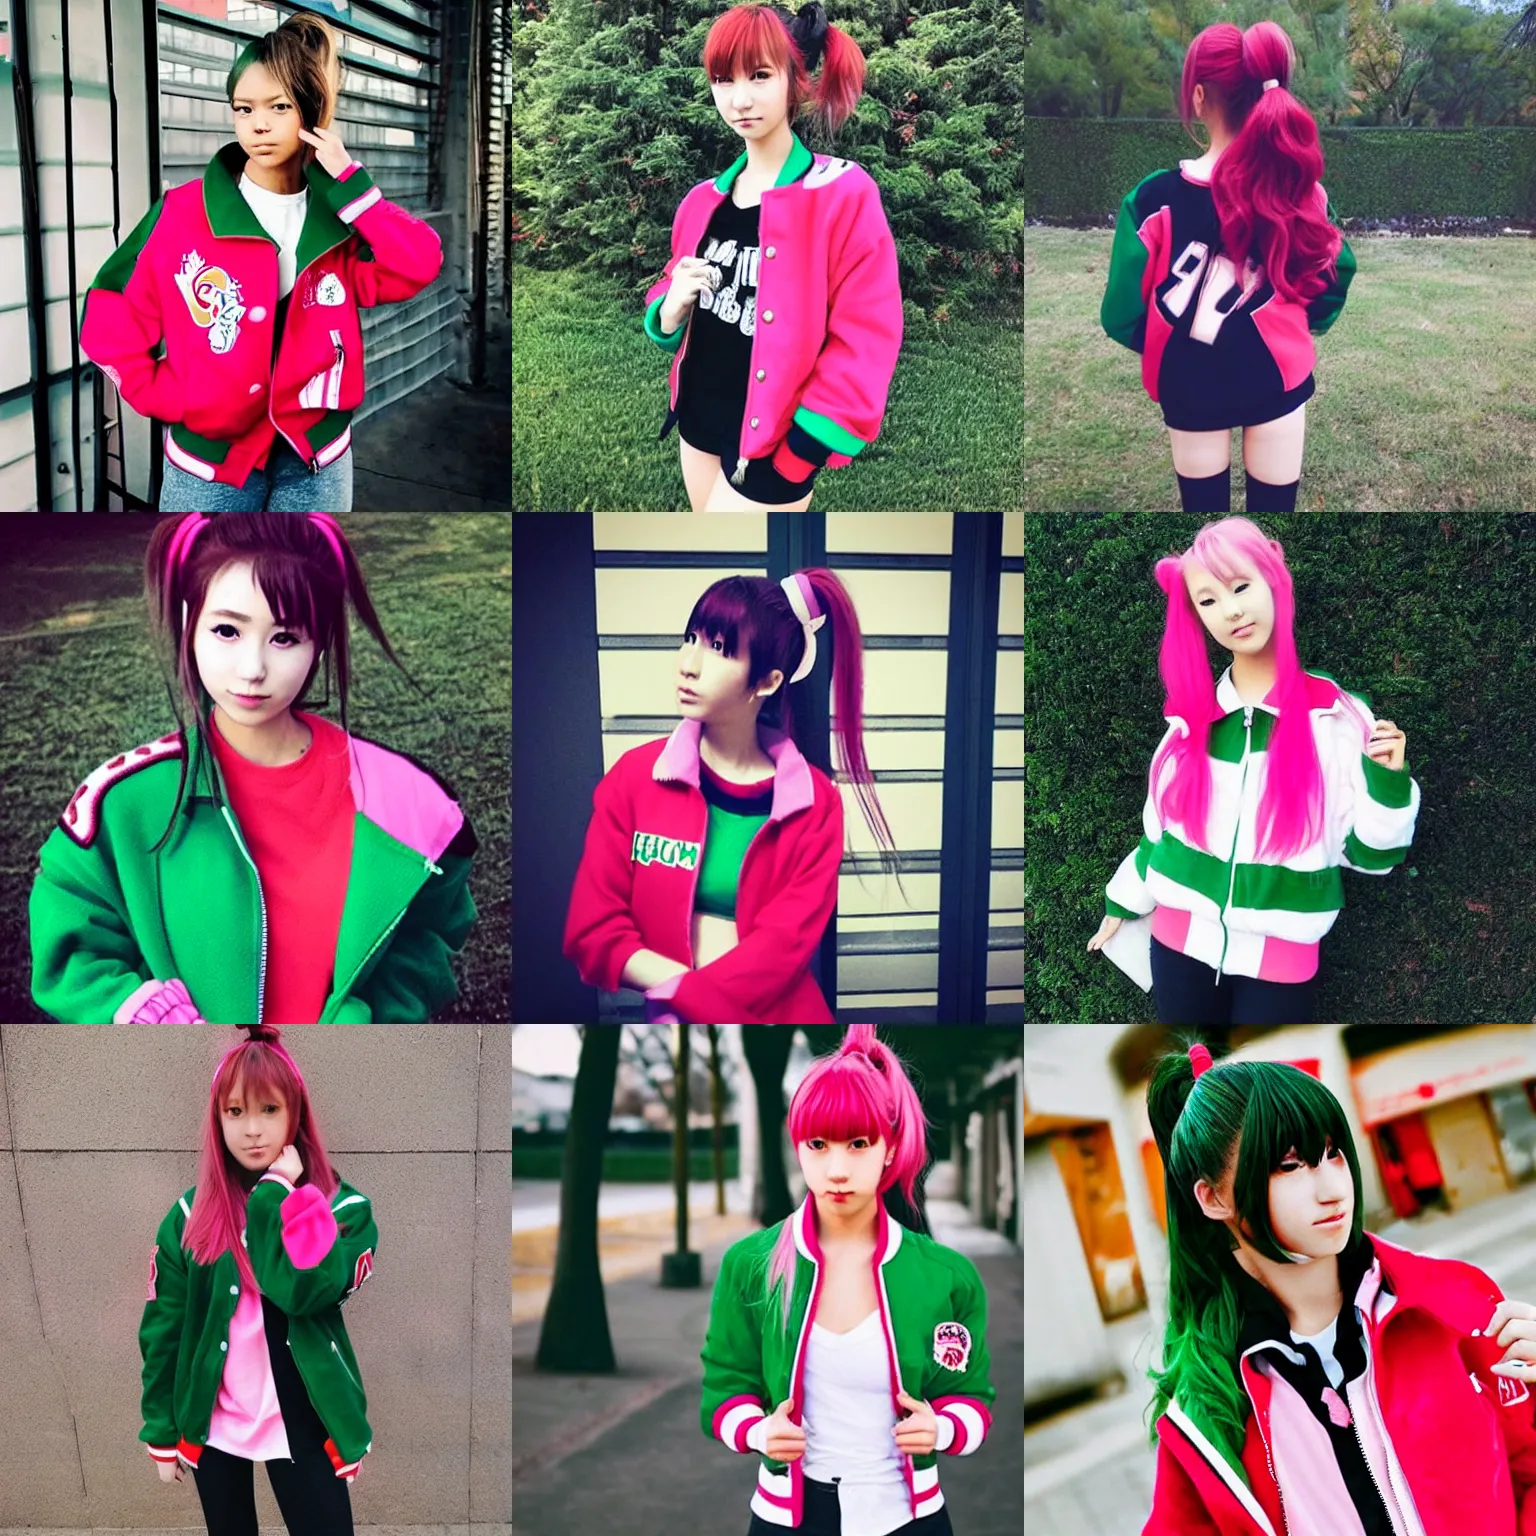 Prompt: “Anime girl with pink ponytail wearing red and green letterman jacket”